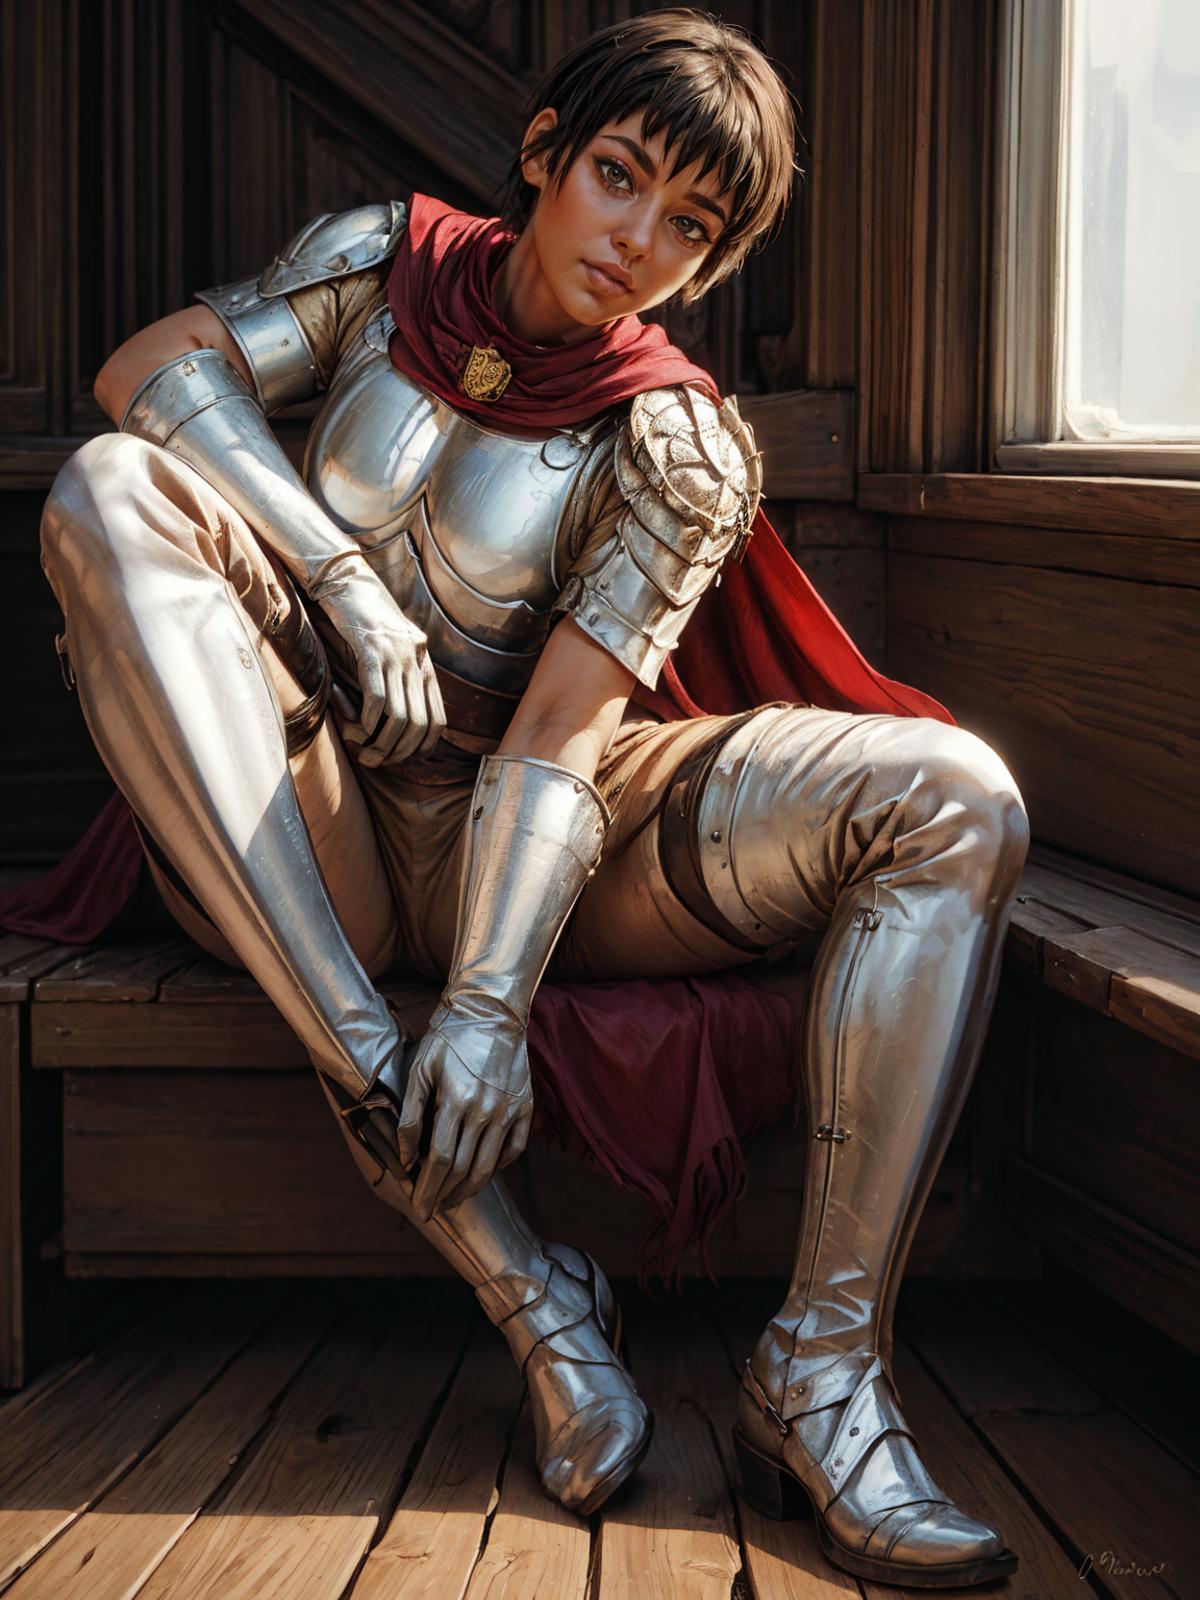 Artistic Illustration of a Female Warrior in a Silver Armor and Red Cape, Posing on a Bench.